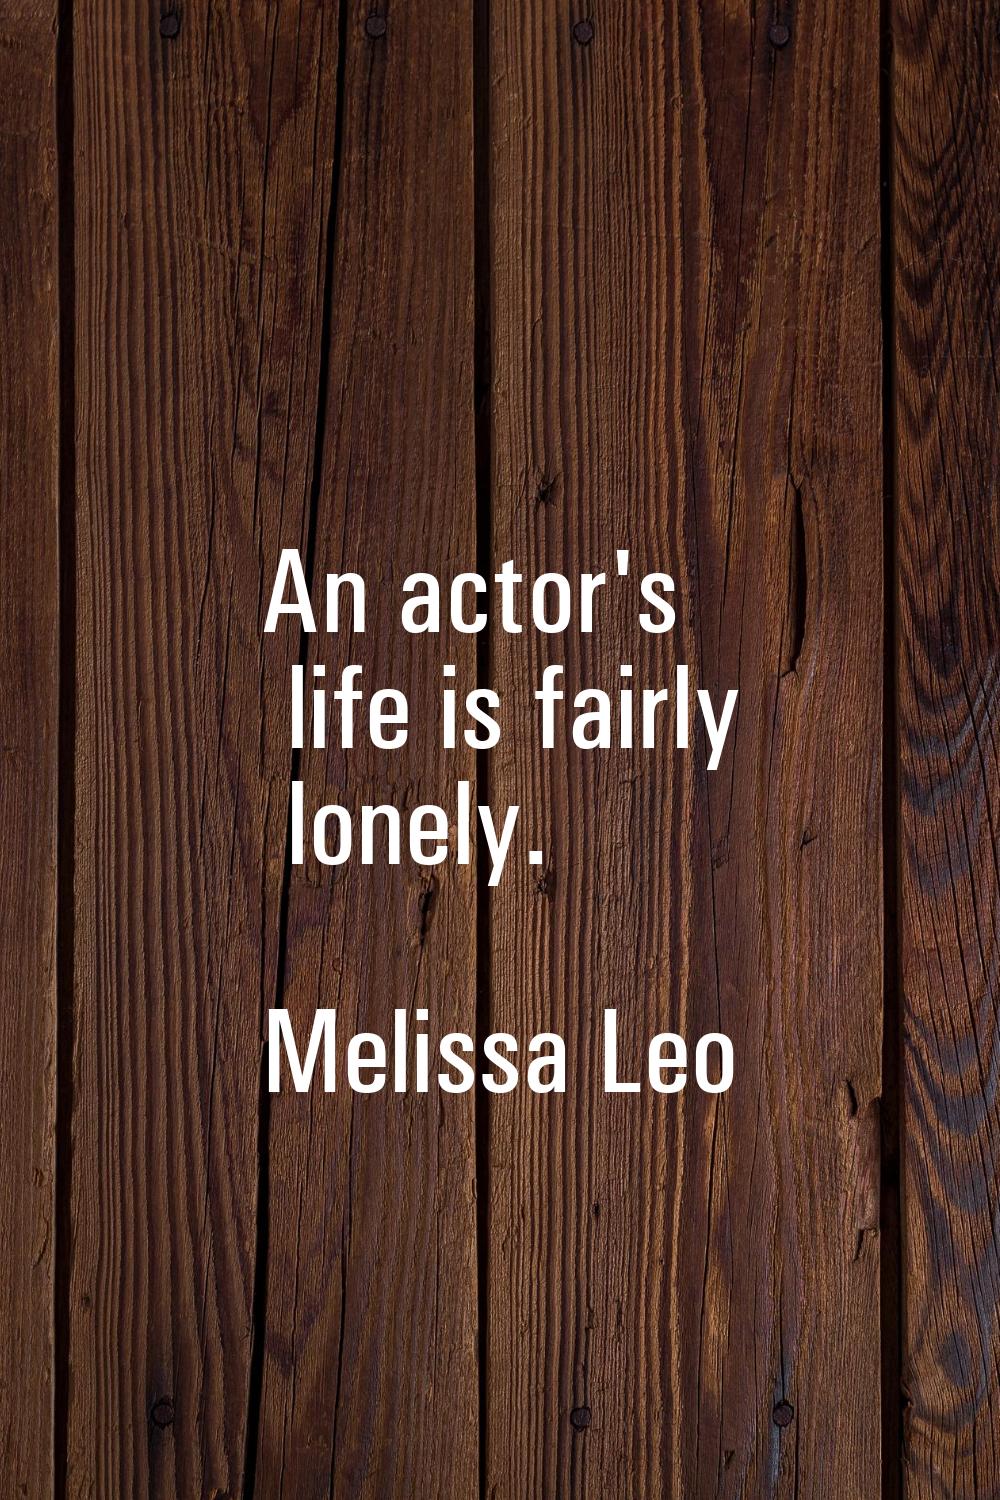 An actor's life is fairly lonely.